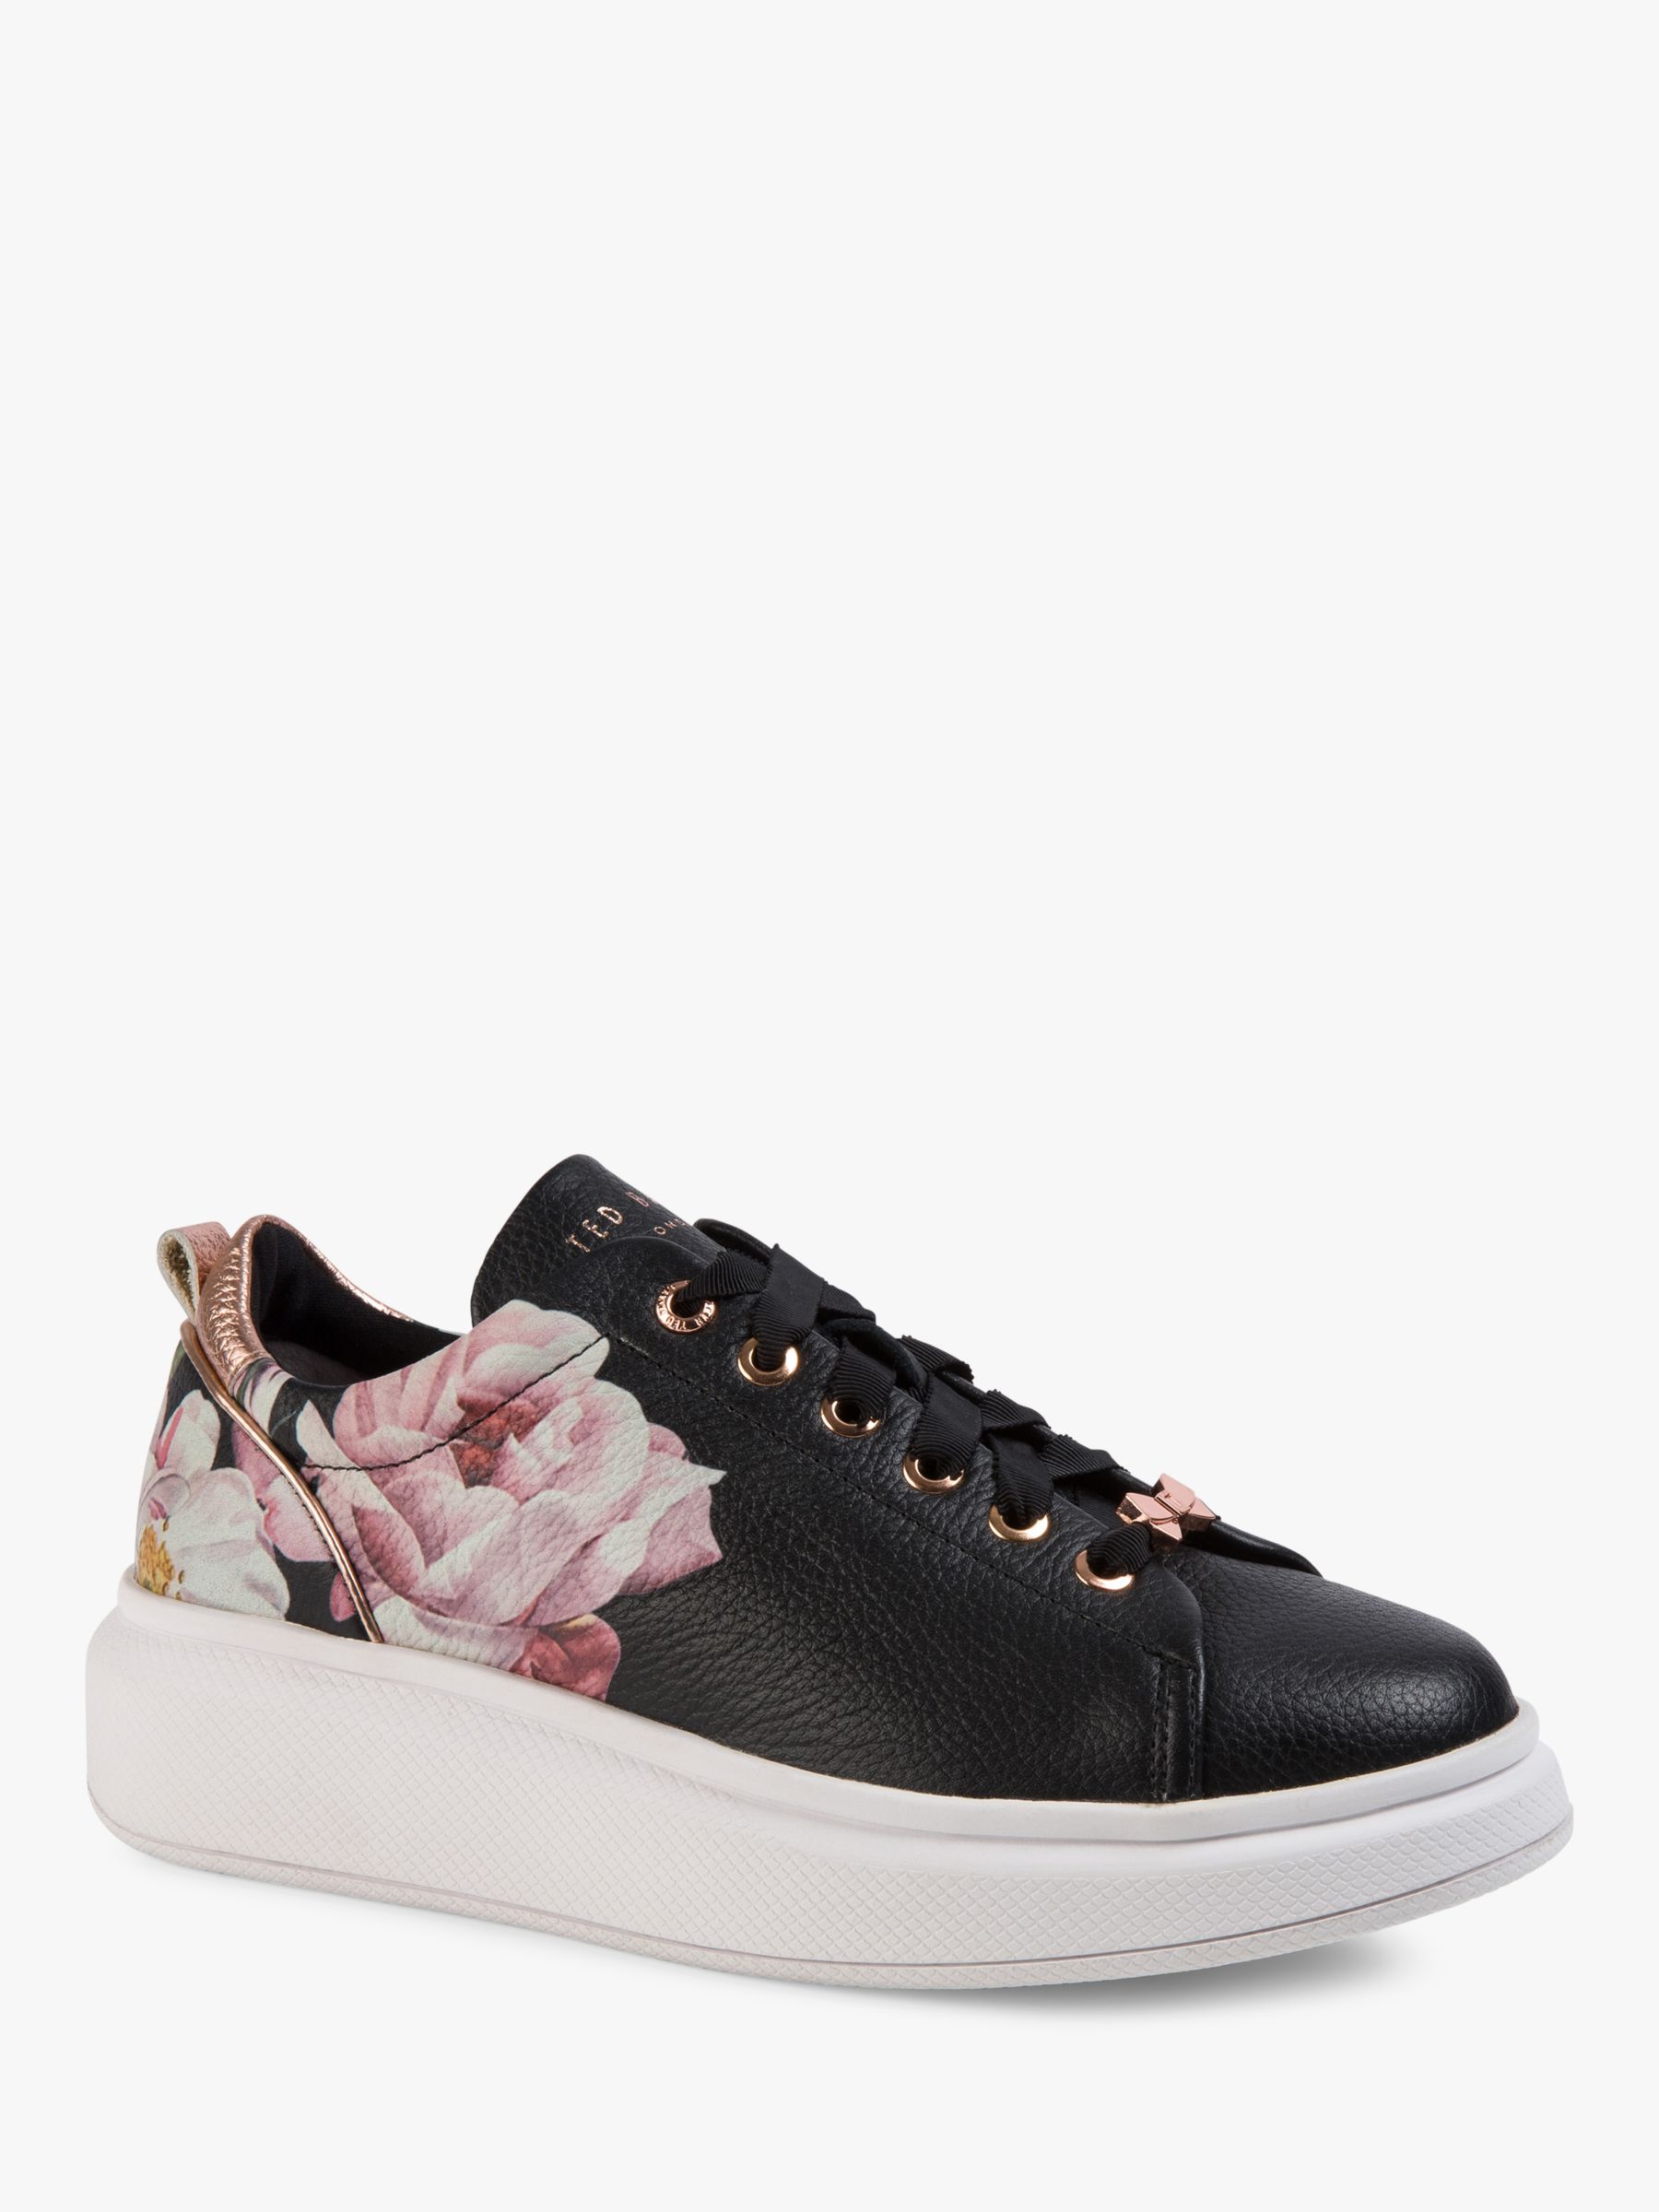 ted baker ailbe 2 sneaker white iguazu leather